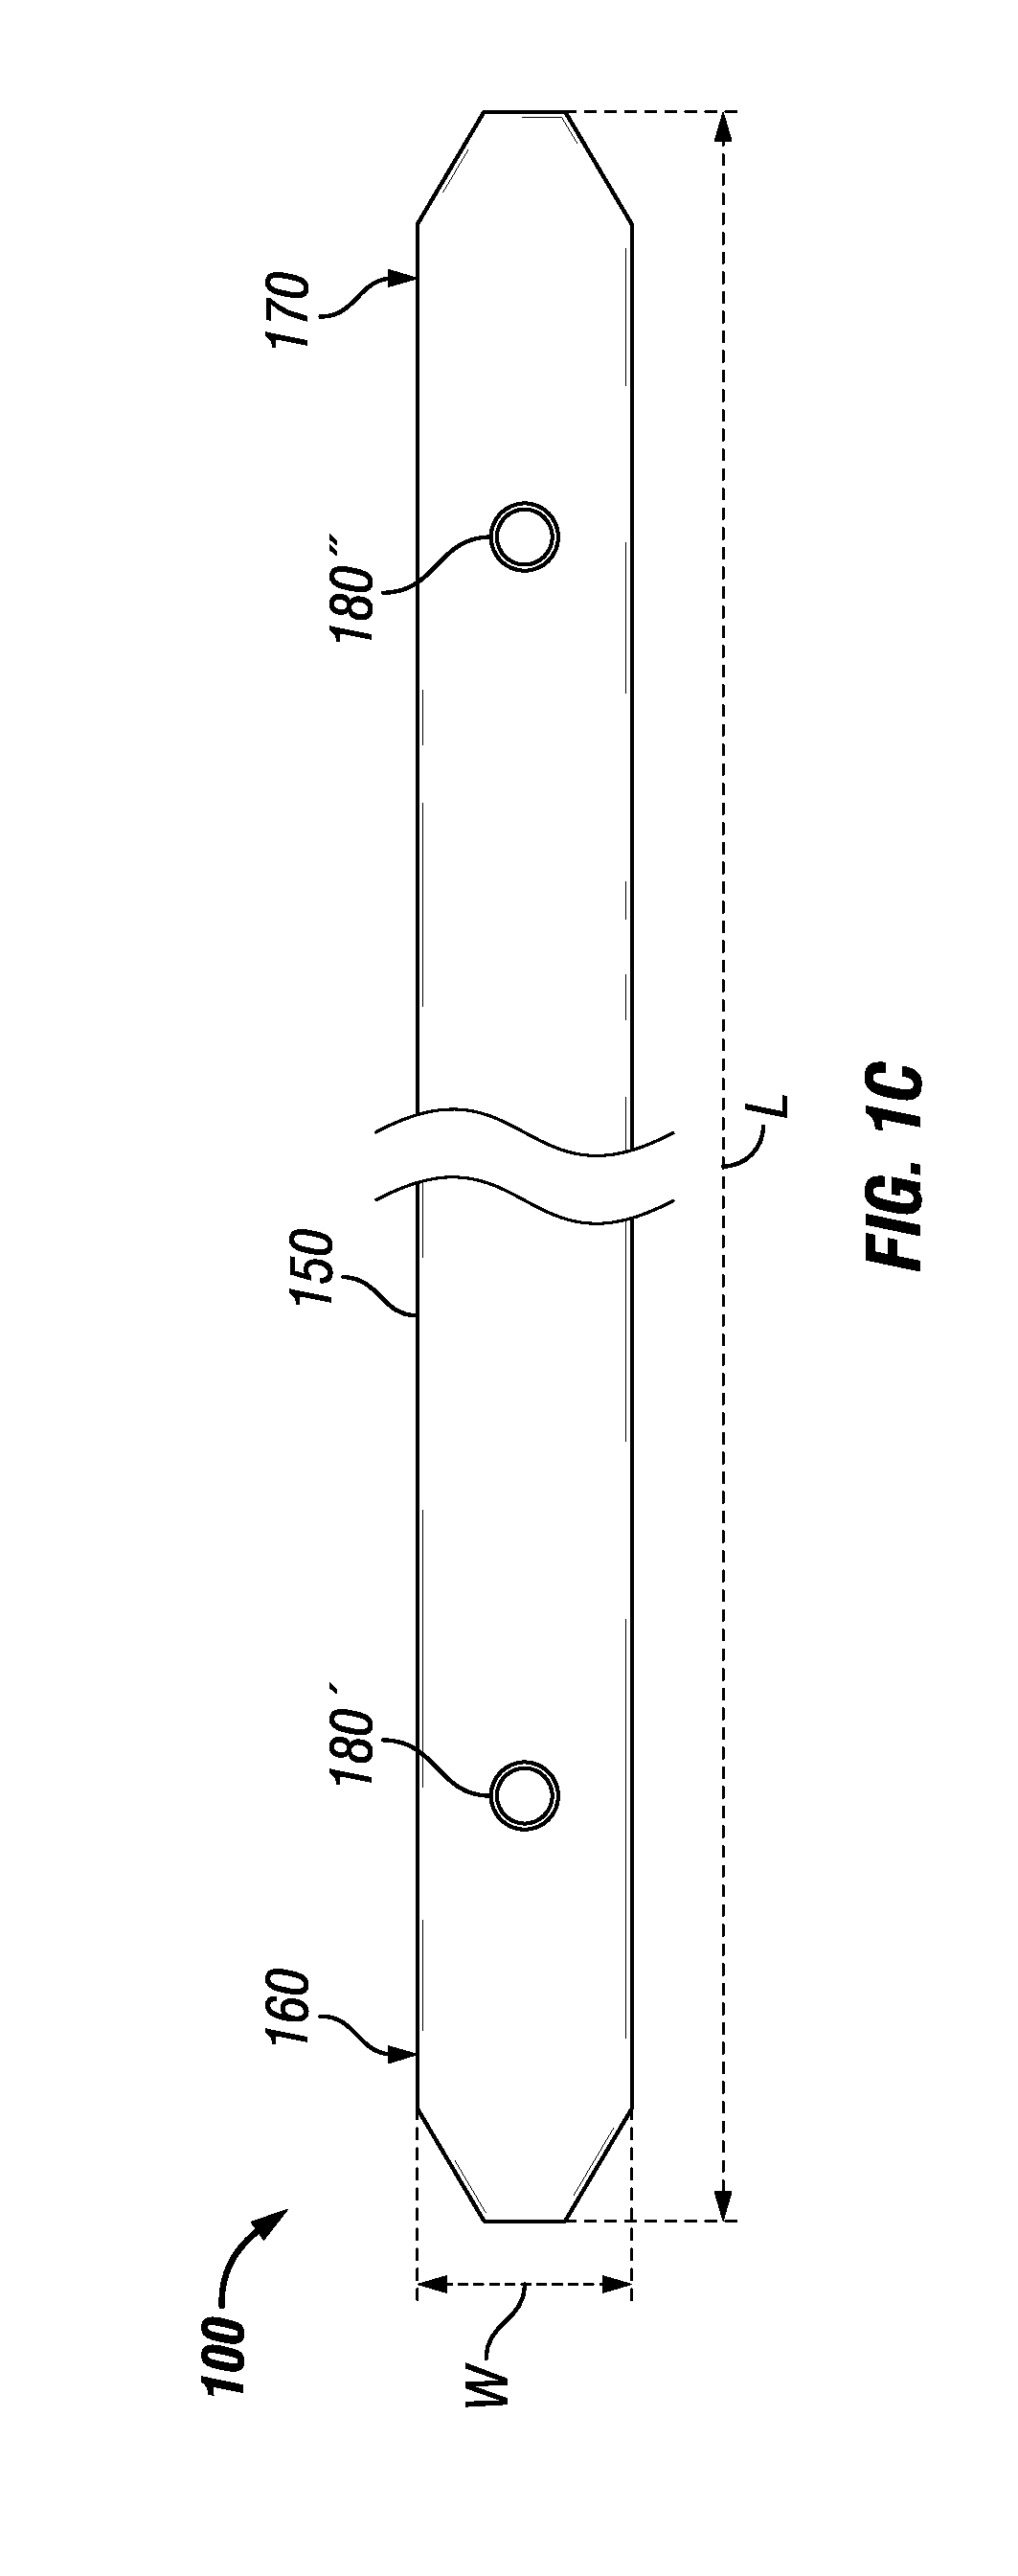 Helmet carrying system and methods